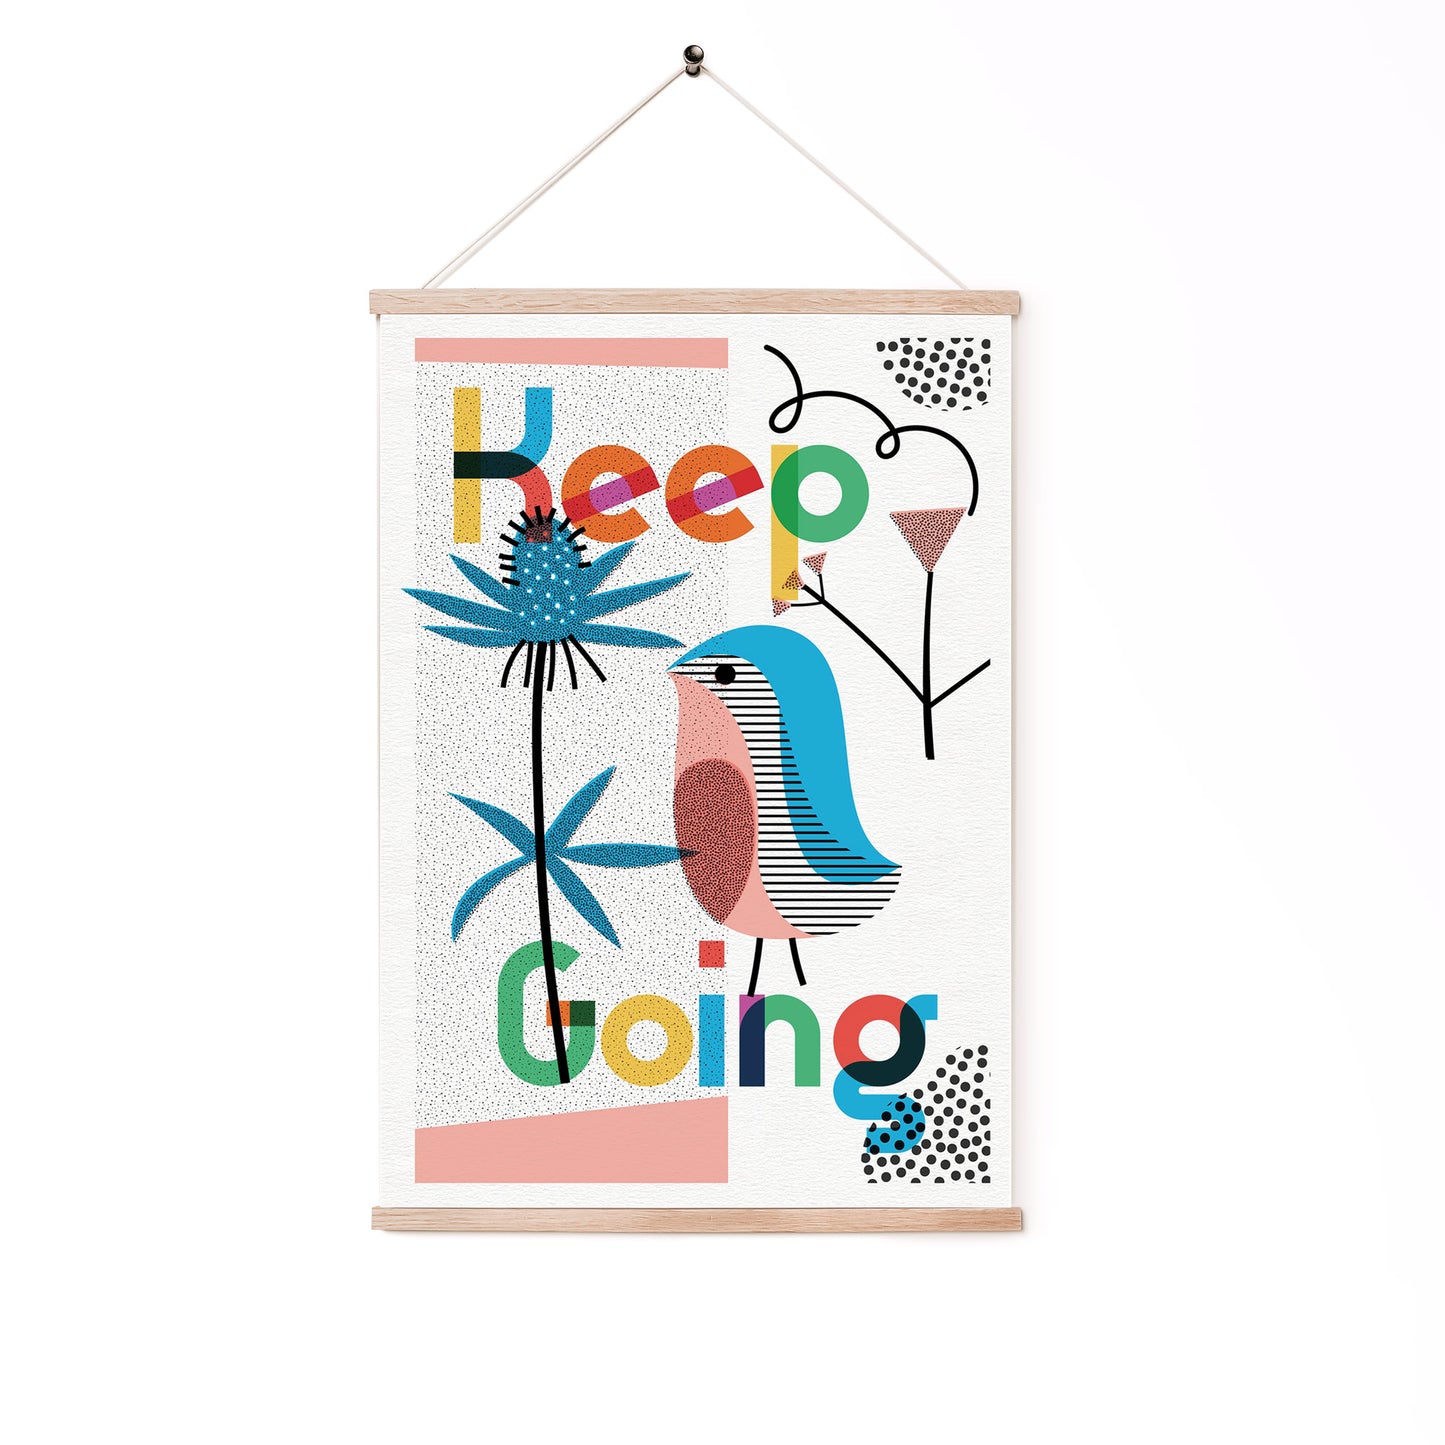 Keep Going A5 Art Print by The Print Lass. Shown in hanger frame (not included)